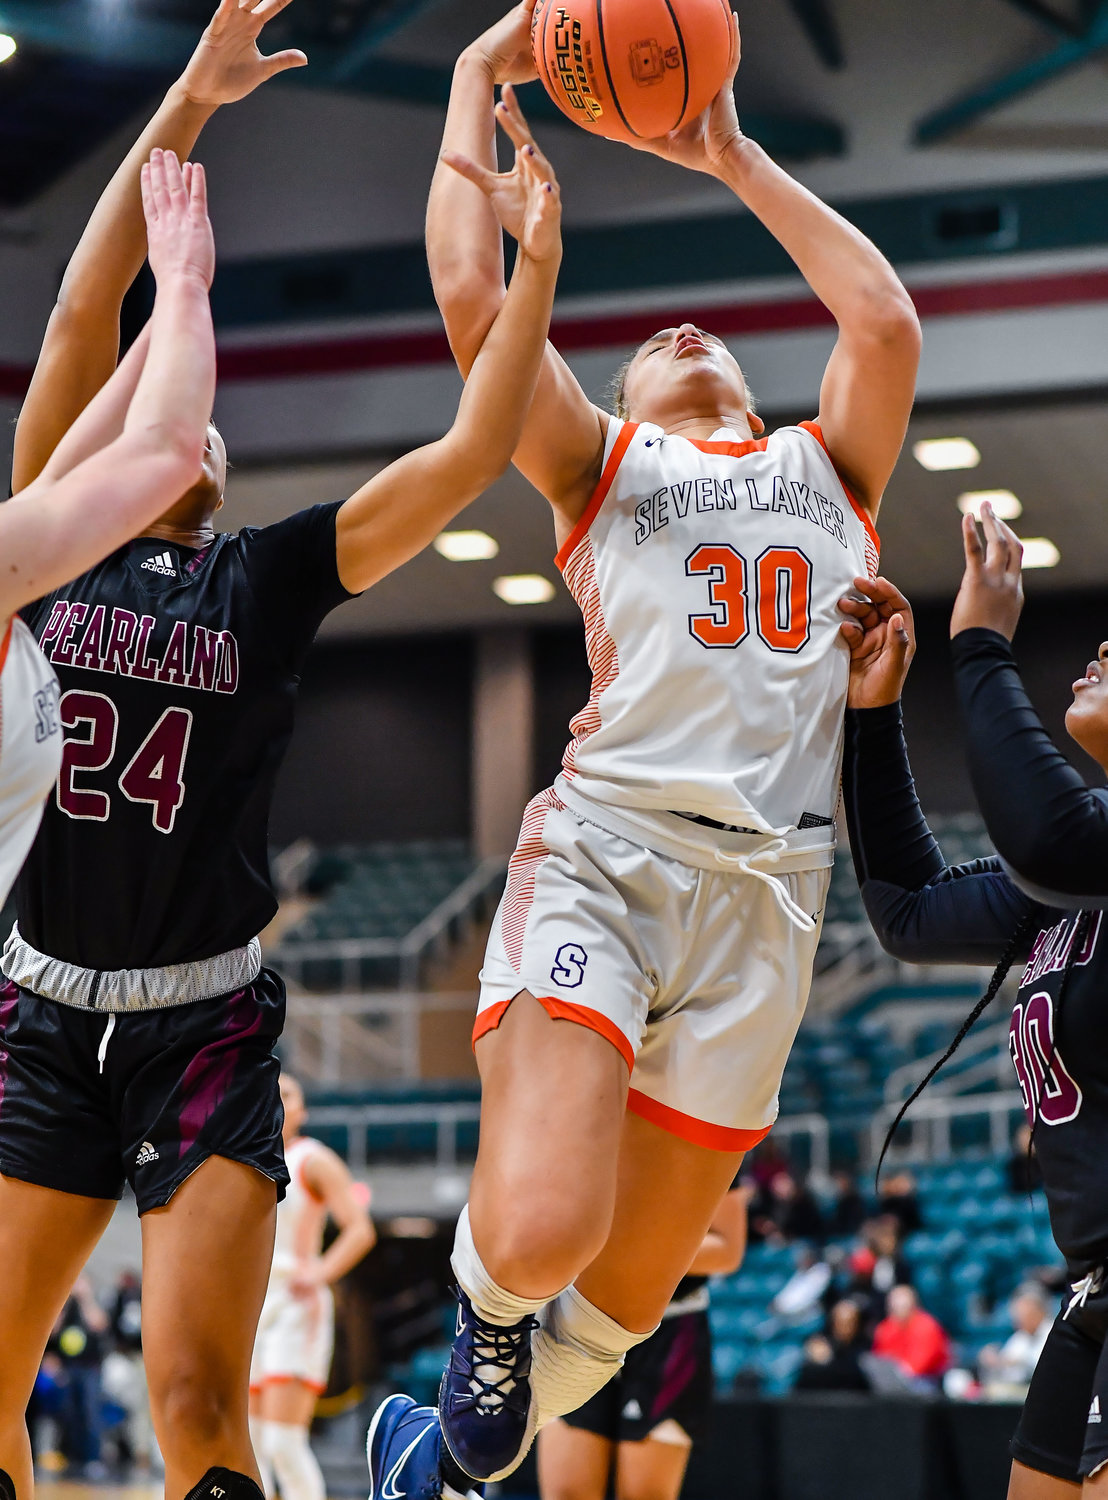 Katy Tx. Feb 25, 2022: Seven Lakes Justice Carlton #30 pulls down the rebound during the Regional SemiFinal playoff game, Seven Lakes vs Pearland at the Merrell Center. (Photo by Mark Goodman / Katy Times)